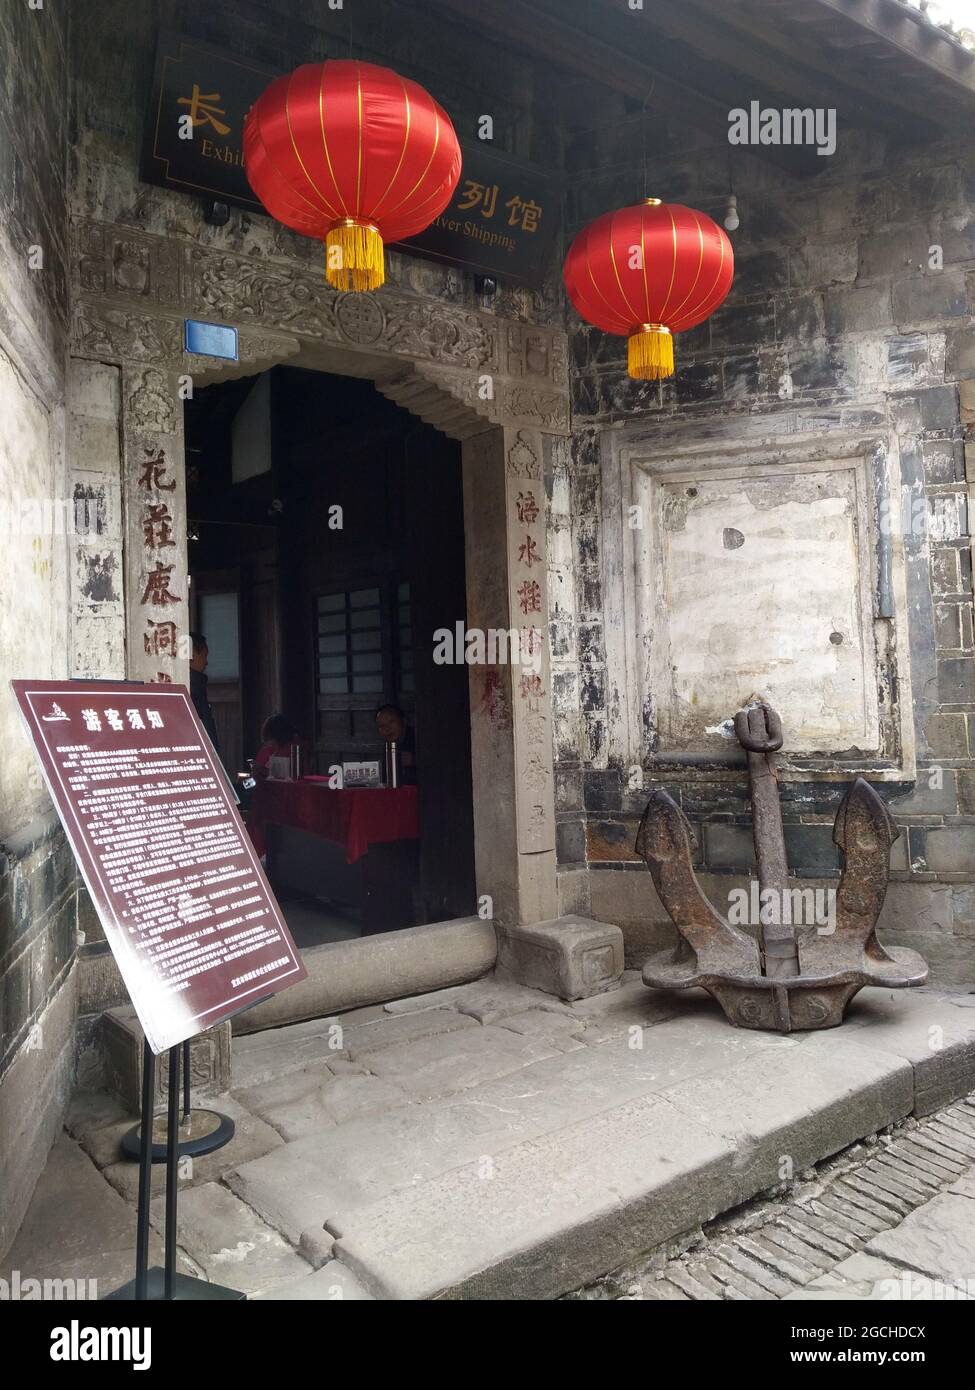 Ancient crumbling building Lizhuang District in Yibin City in Sichuan, China showing traditional architecture and stone work. Stock Photo